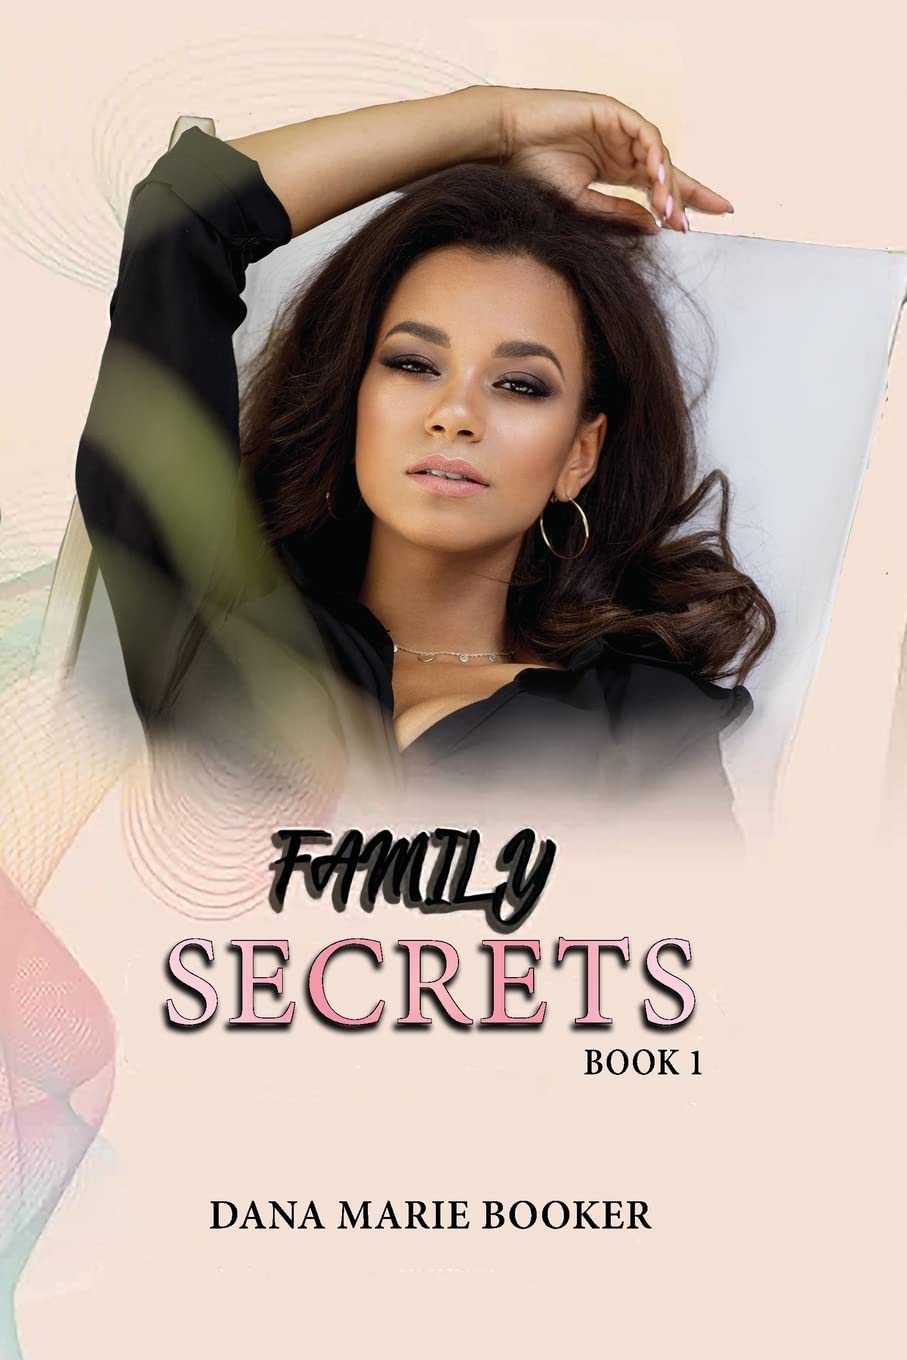 Authors' Tranquility Press Publishes Dana Marie Booker’s Family Secrets Book 1